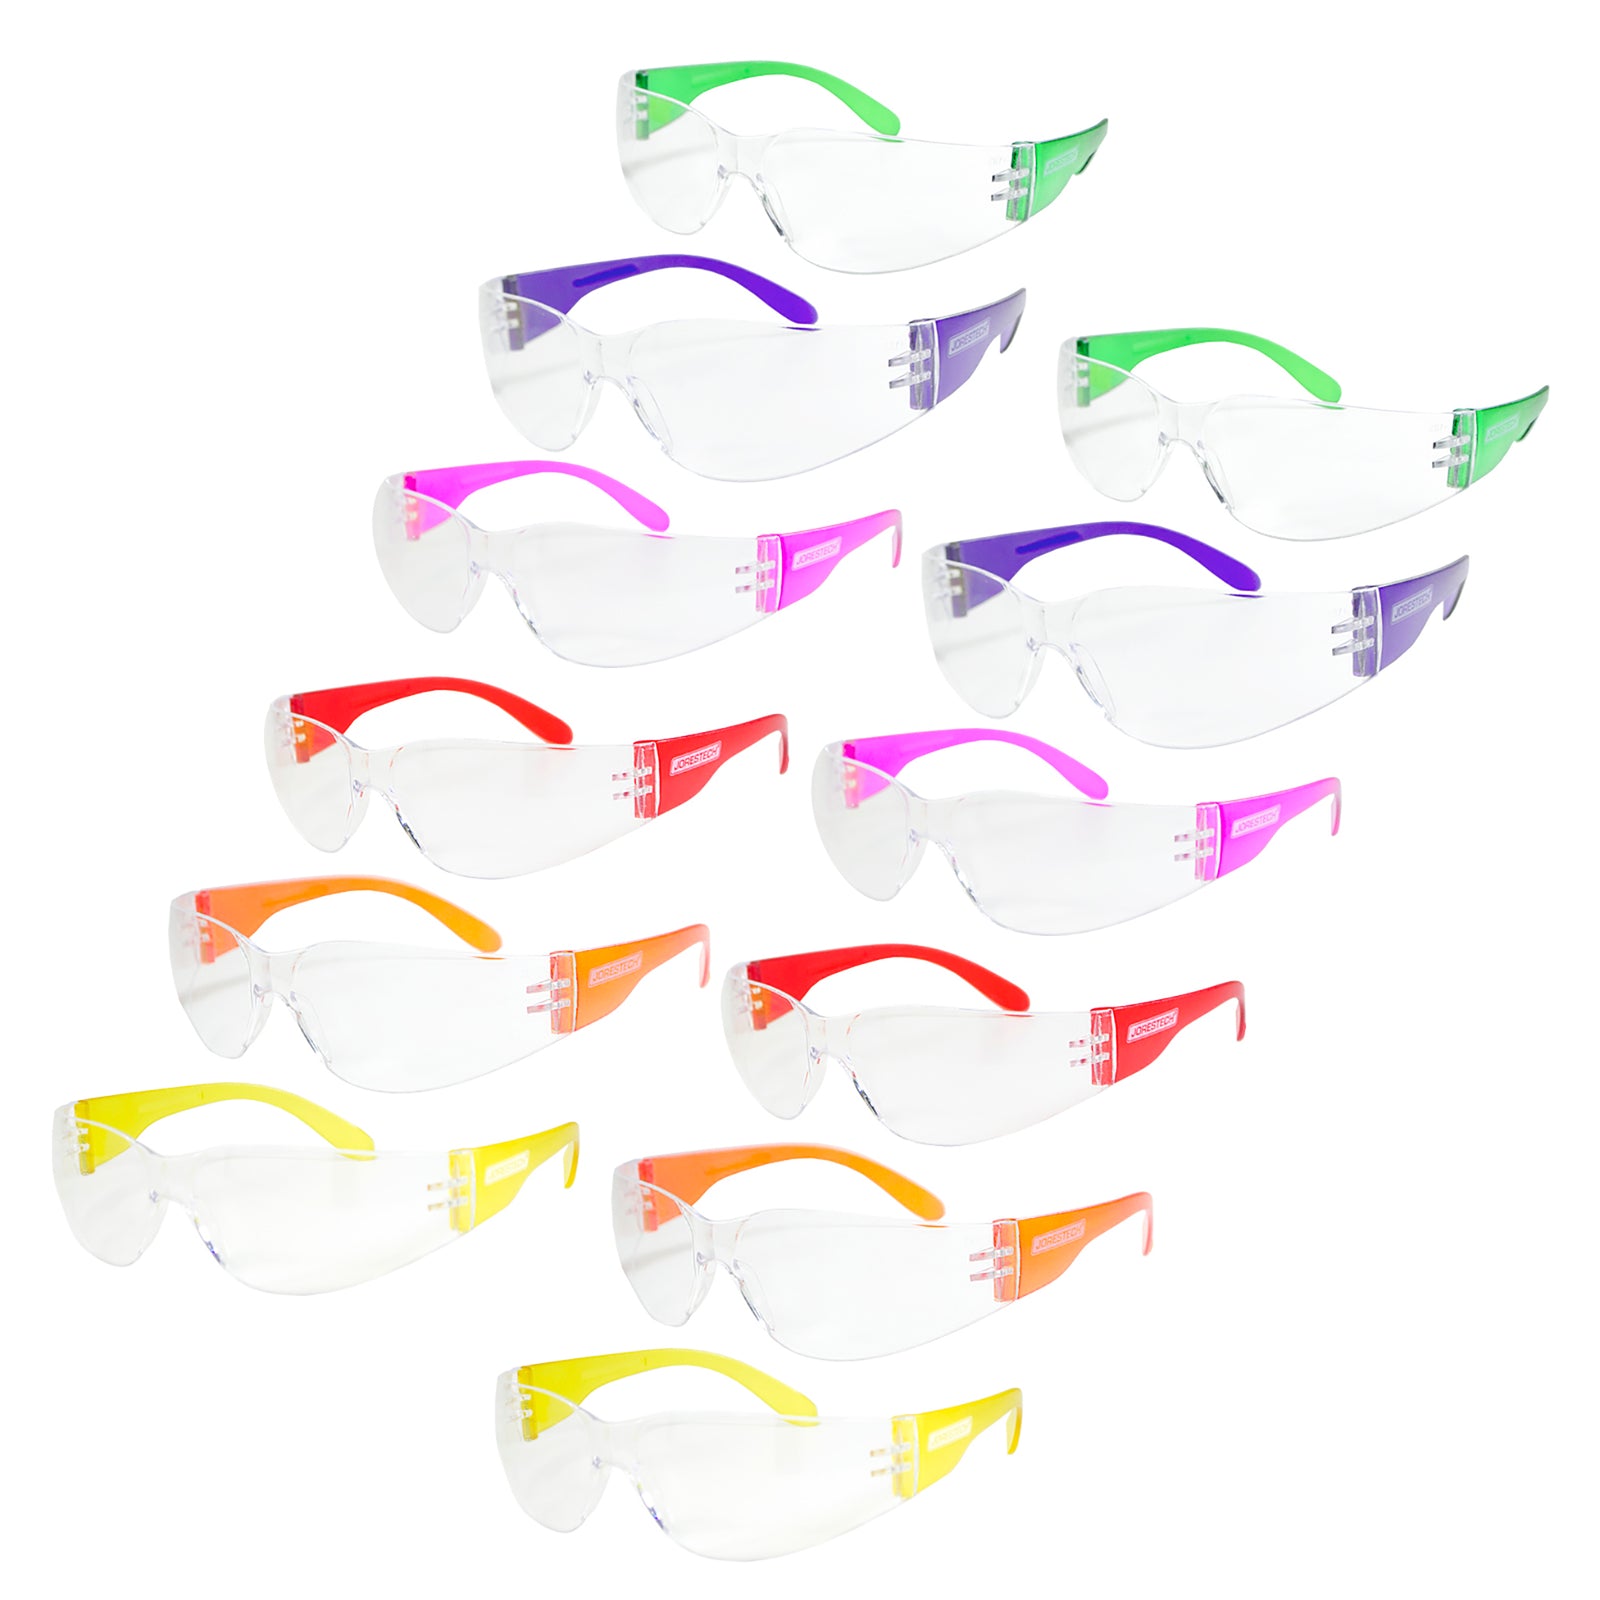 12 glasses with clear lens and multi color temple  JORESTECH Safety High Impact Glasses over white background. There are 2 ANSI compliant lenses of these colors: yellow, orange, red, pink, purple and green. 